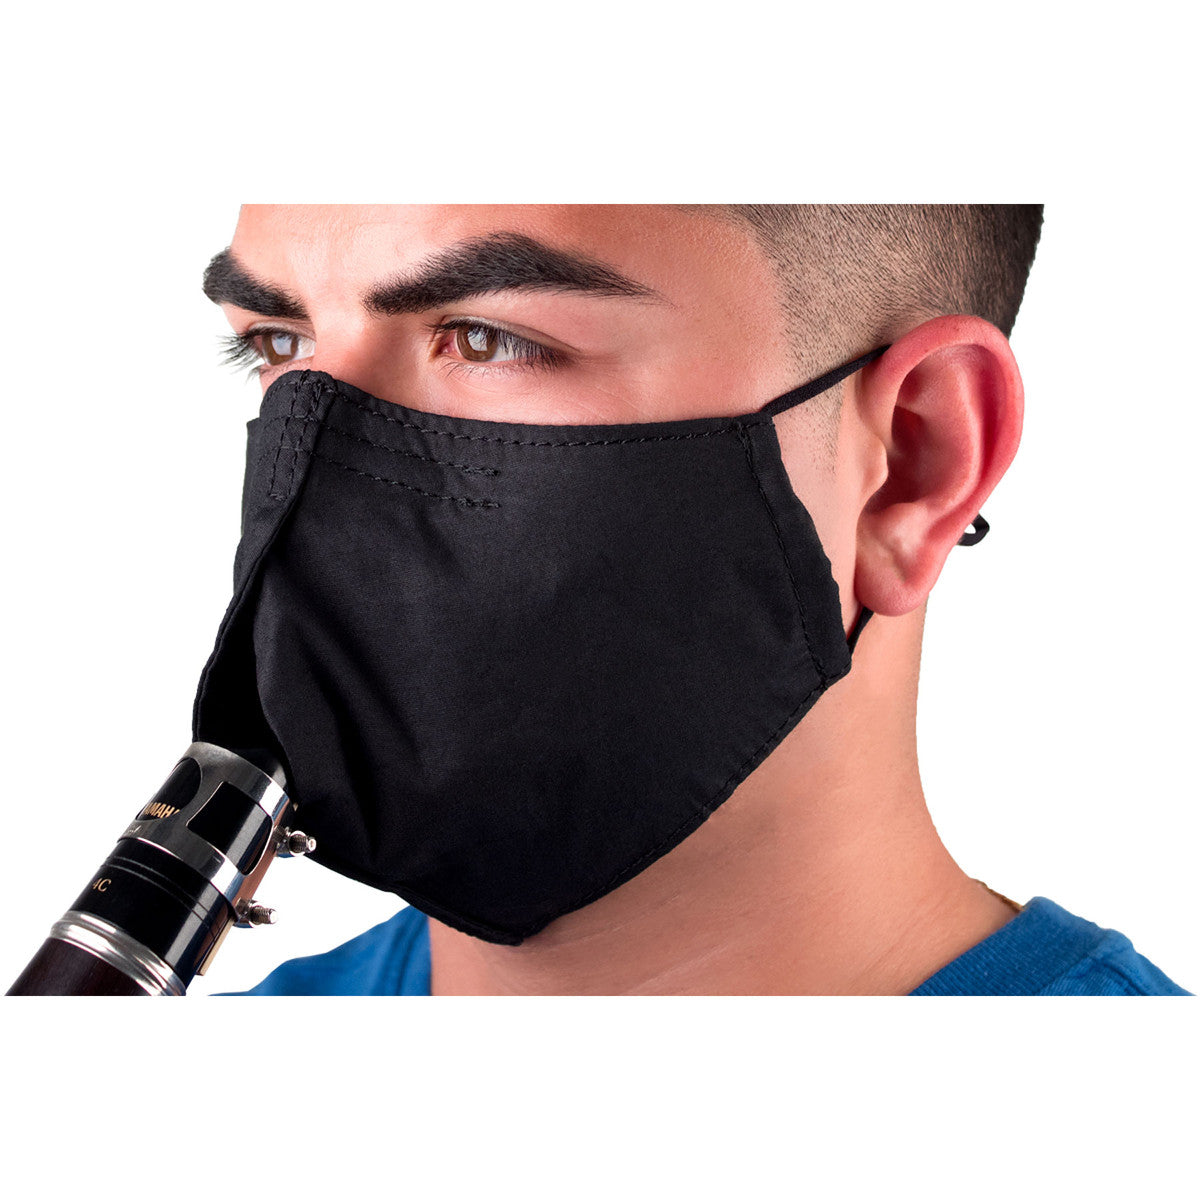 Face Mask for Wind Instruments